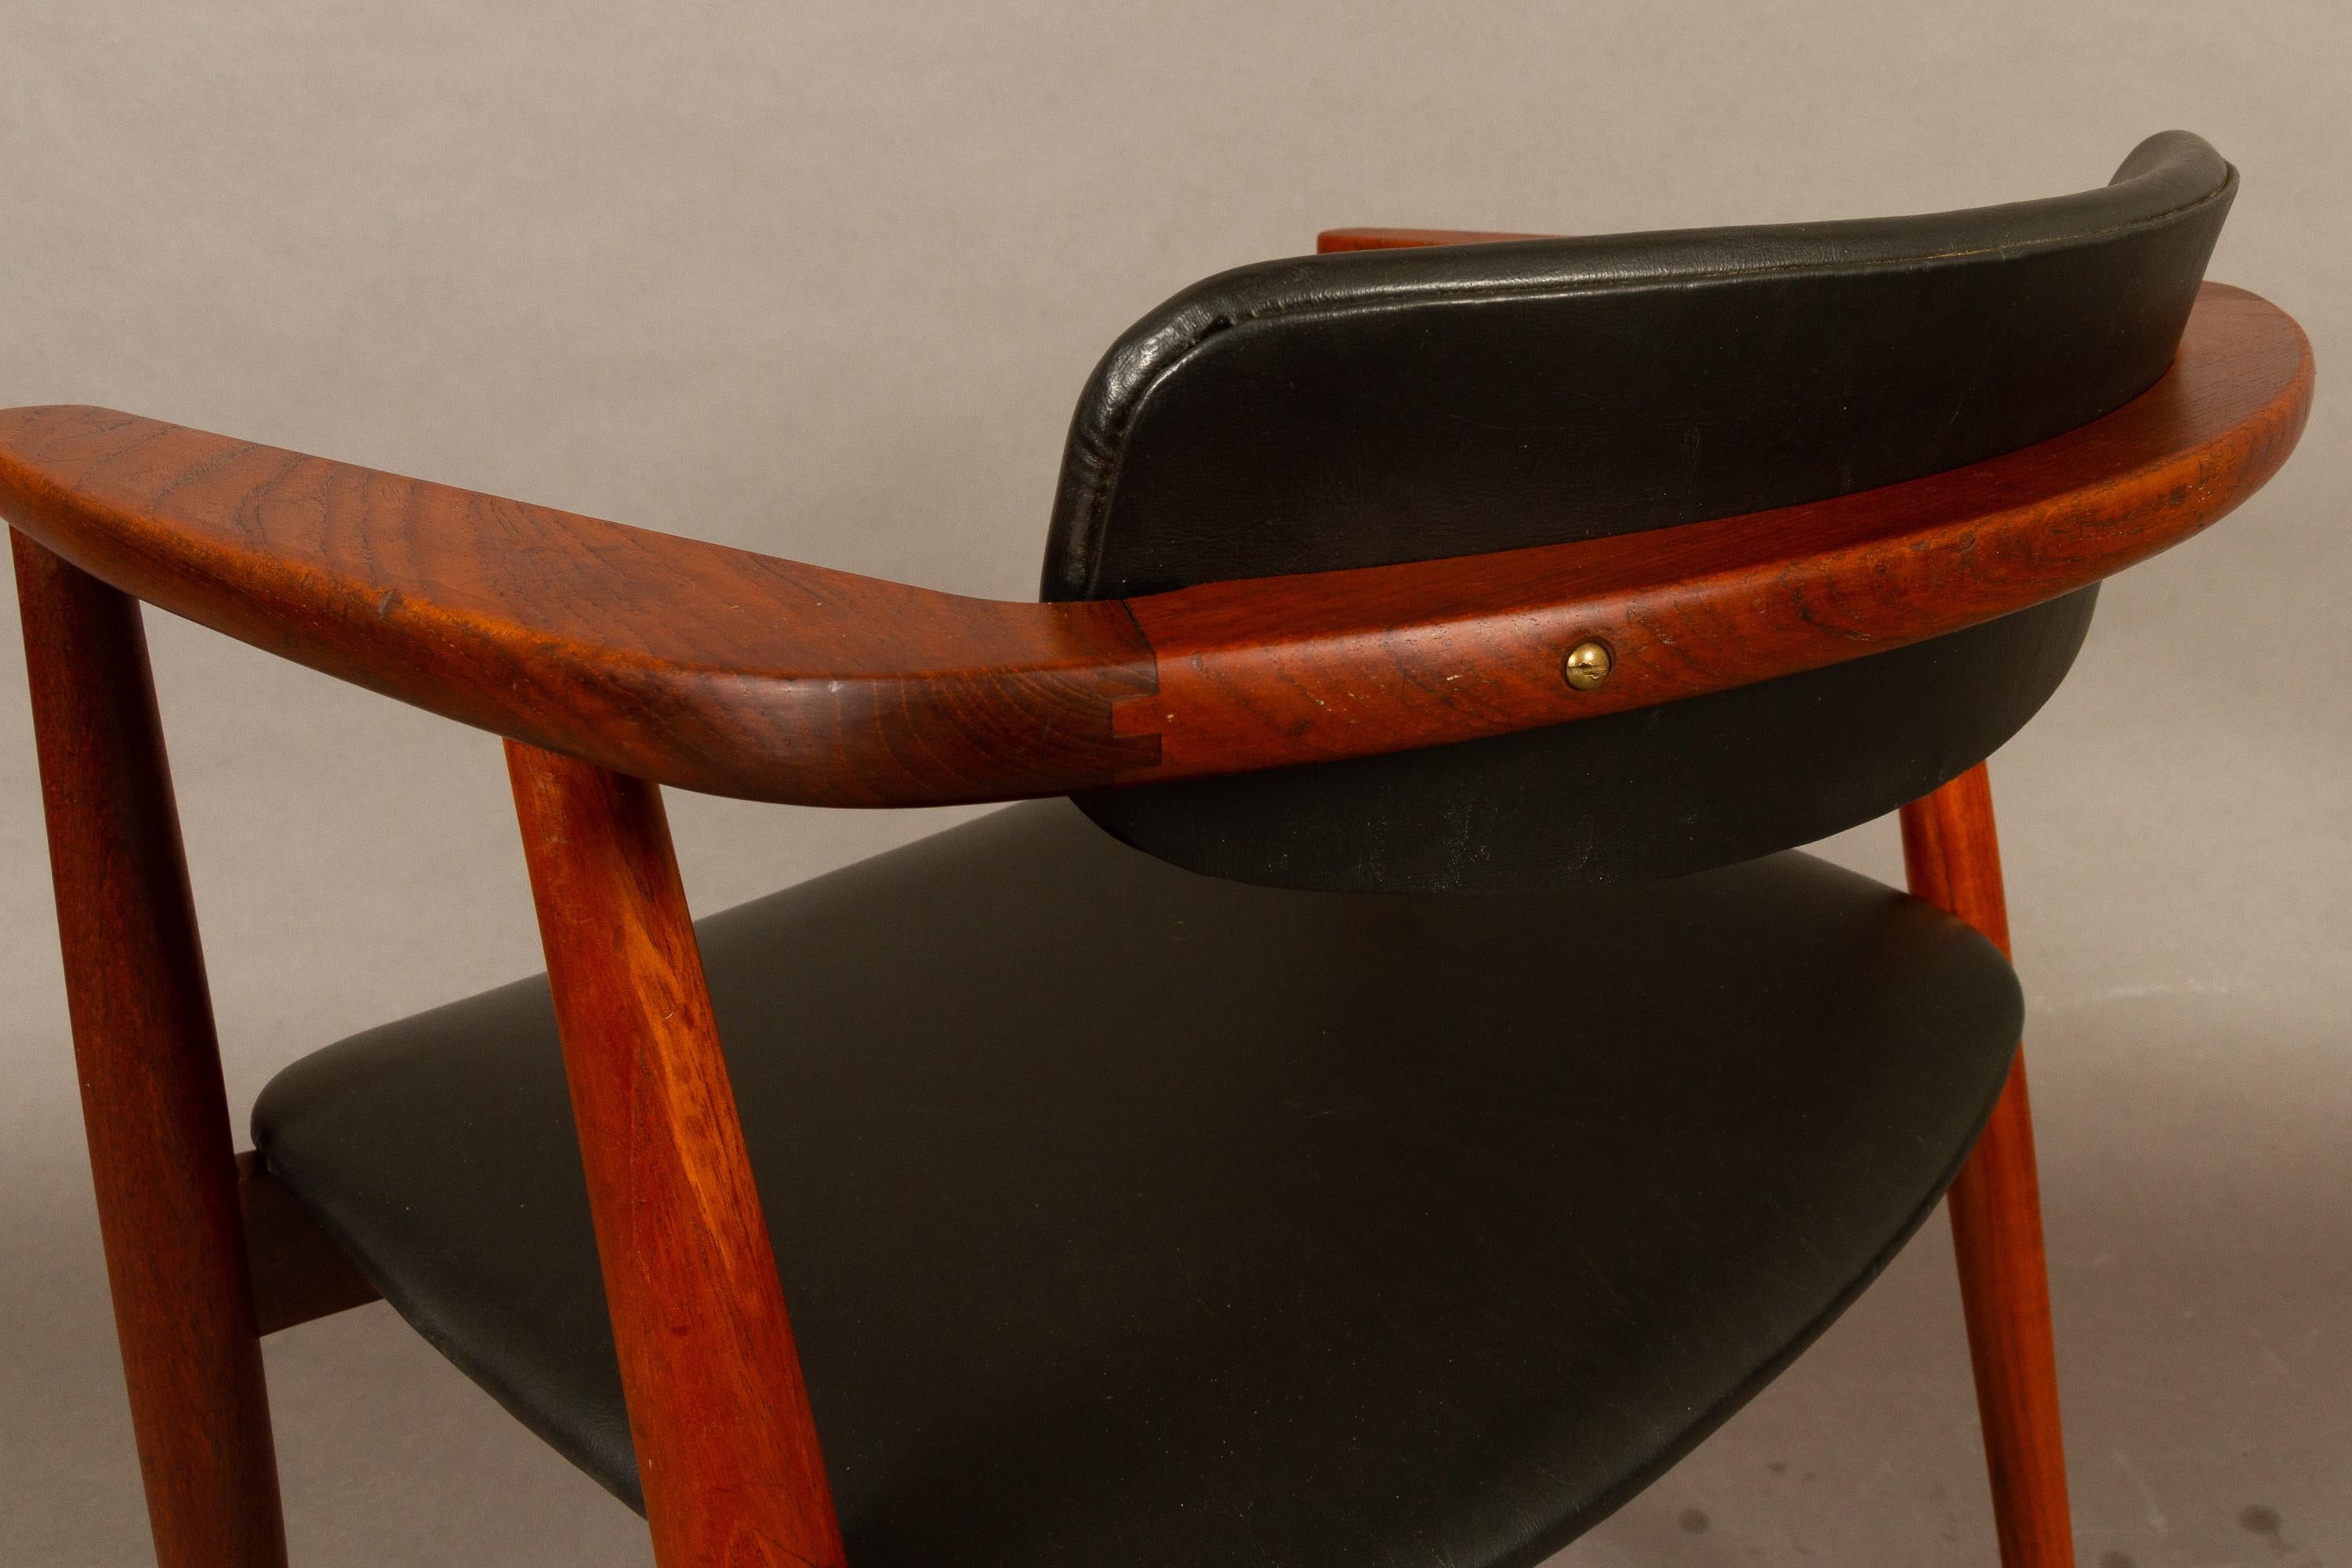 Danish vintage teak armchair, 1960s
Classic and elegant midcentury modern armchair in solid teak. Interesting design with curved backrest suspended from the horizontal elongated armrests gives this chair a very distinctive profile. Original